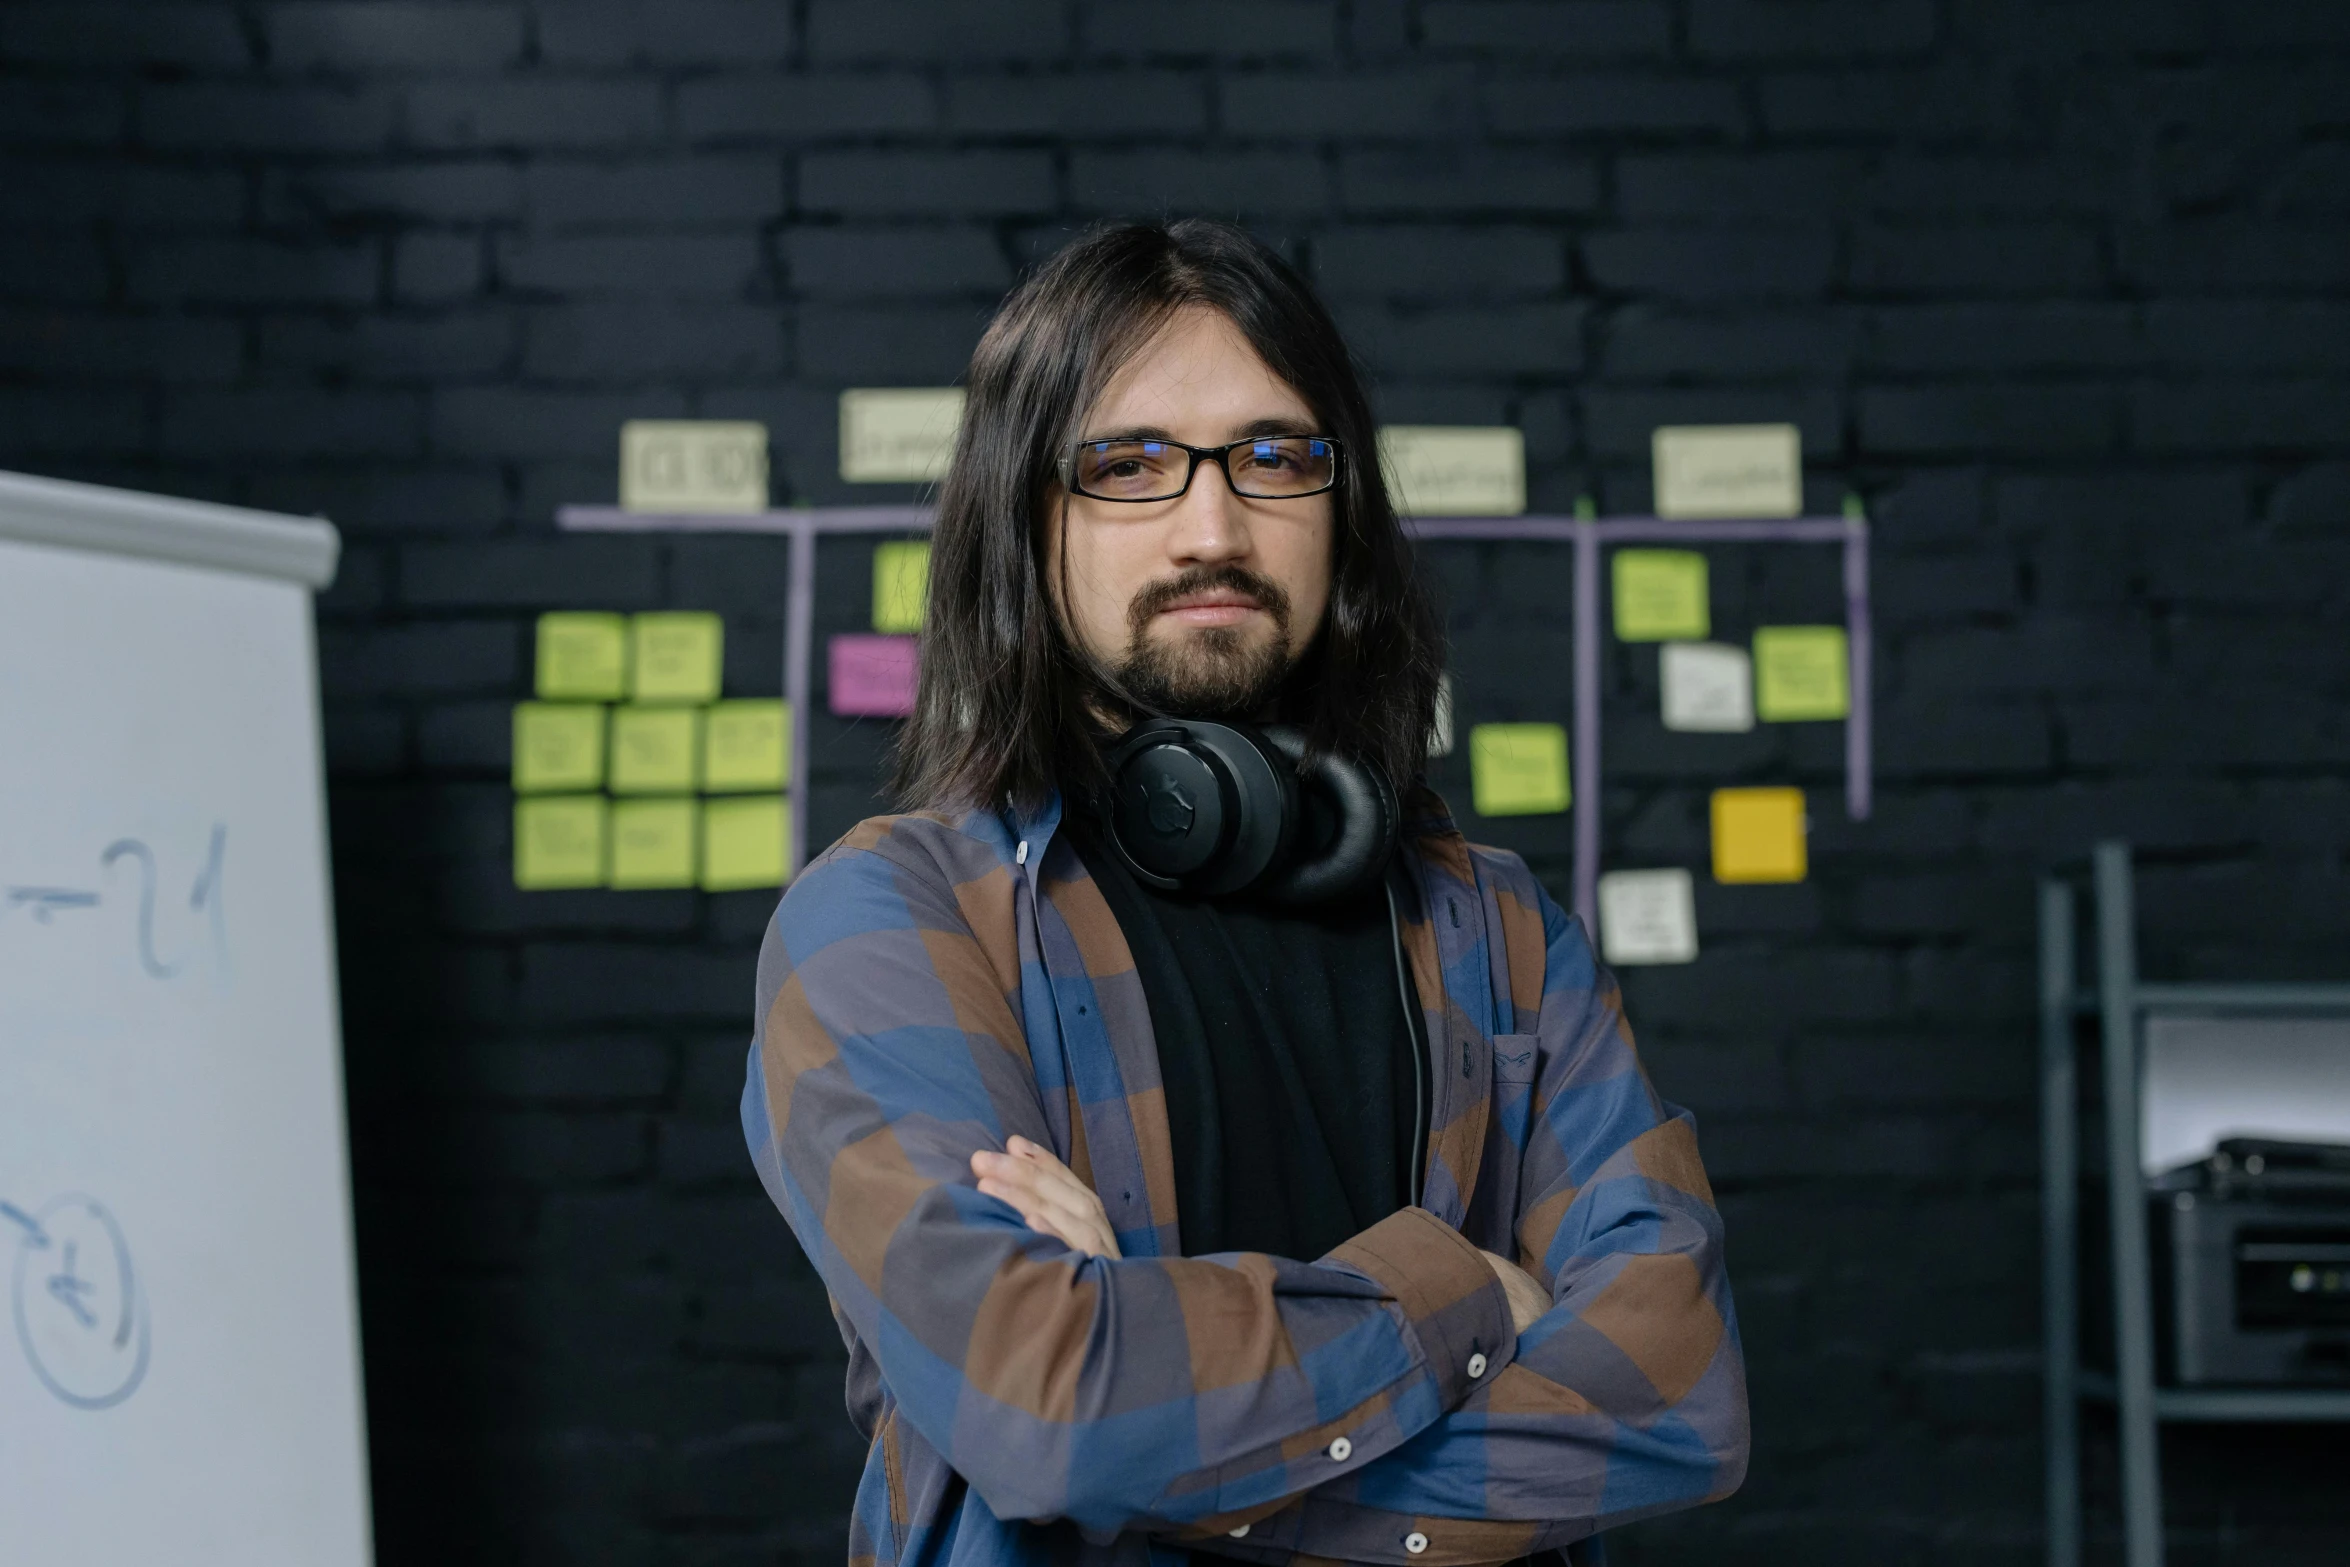 a man wearing headphones standing in front of a whiteboard, pexels contest winner, with his long black hair, hasbulla magomedov, the game designer, against dark background